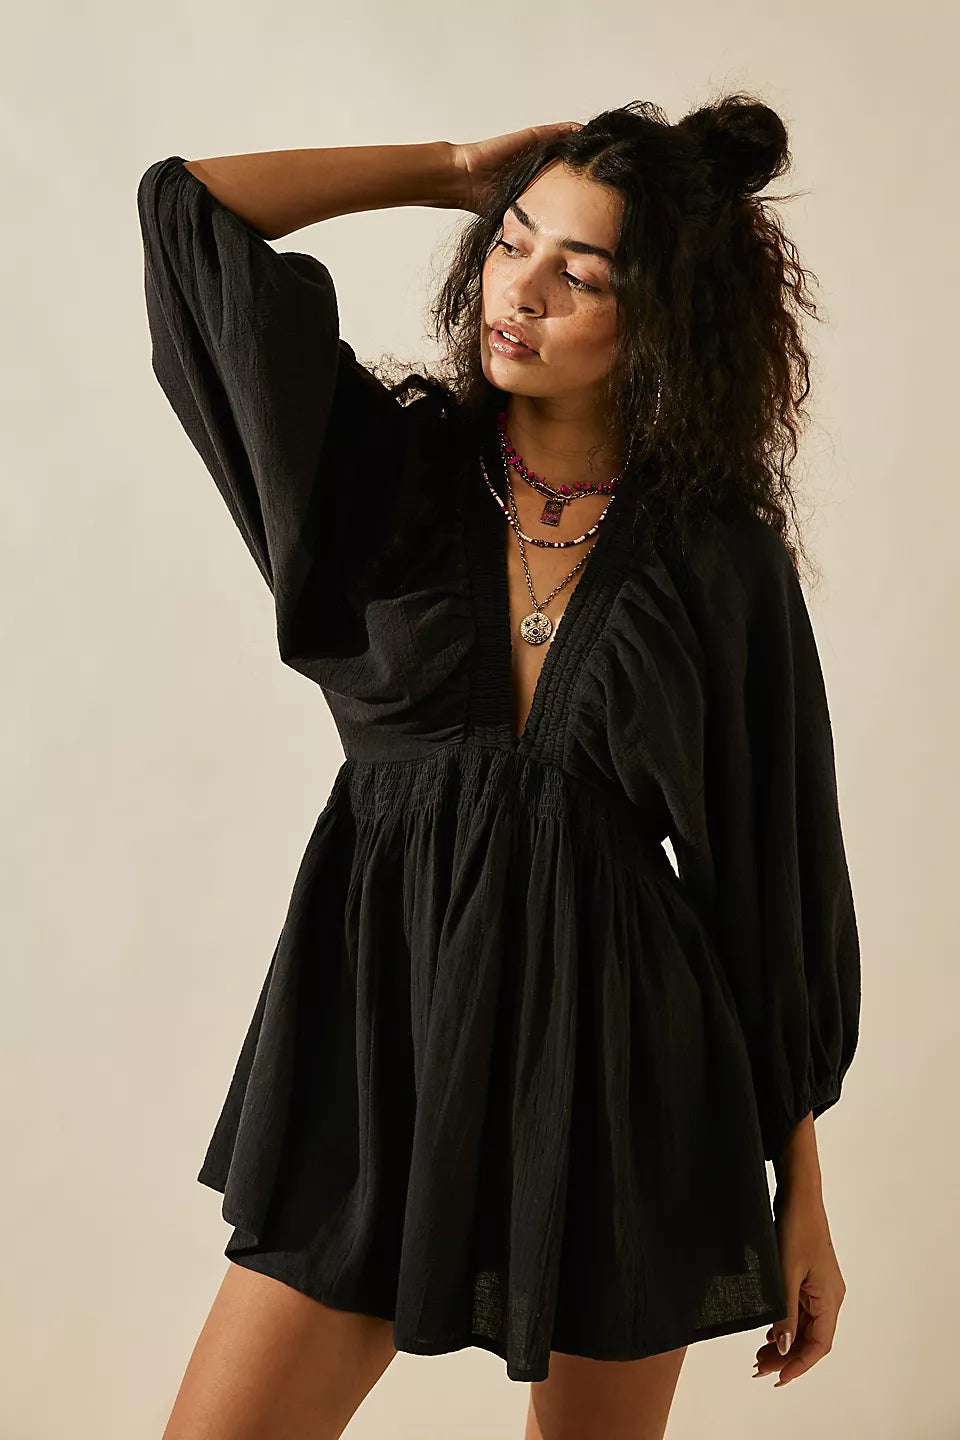 Free People For The Moment Mini Dress - Black - Sun Diego Boardshop